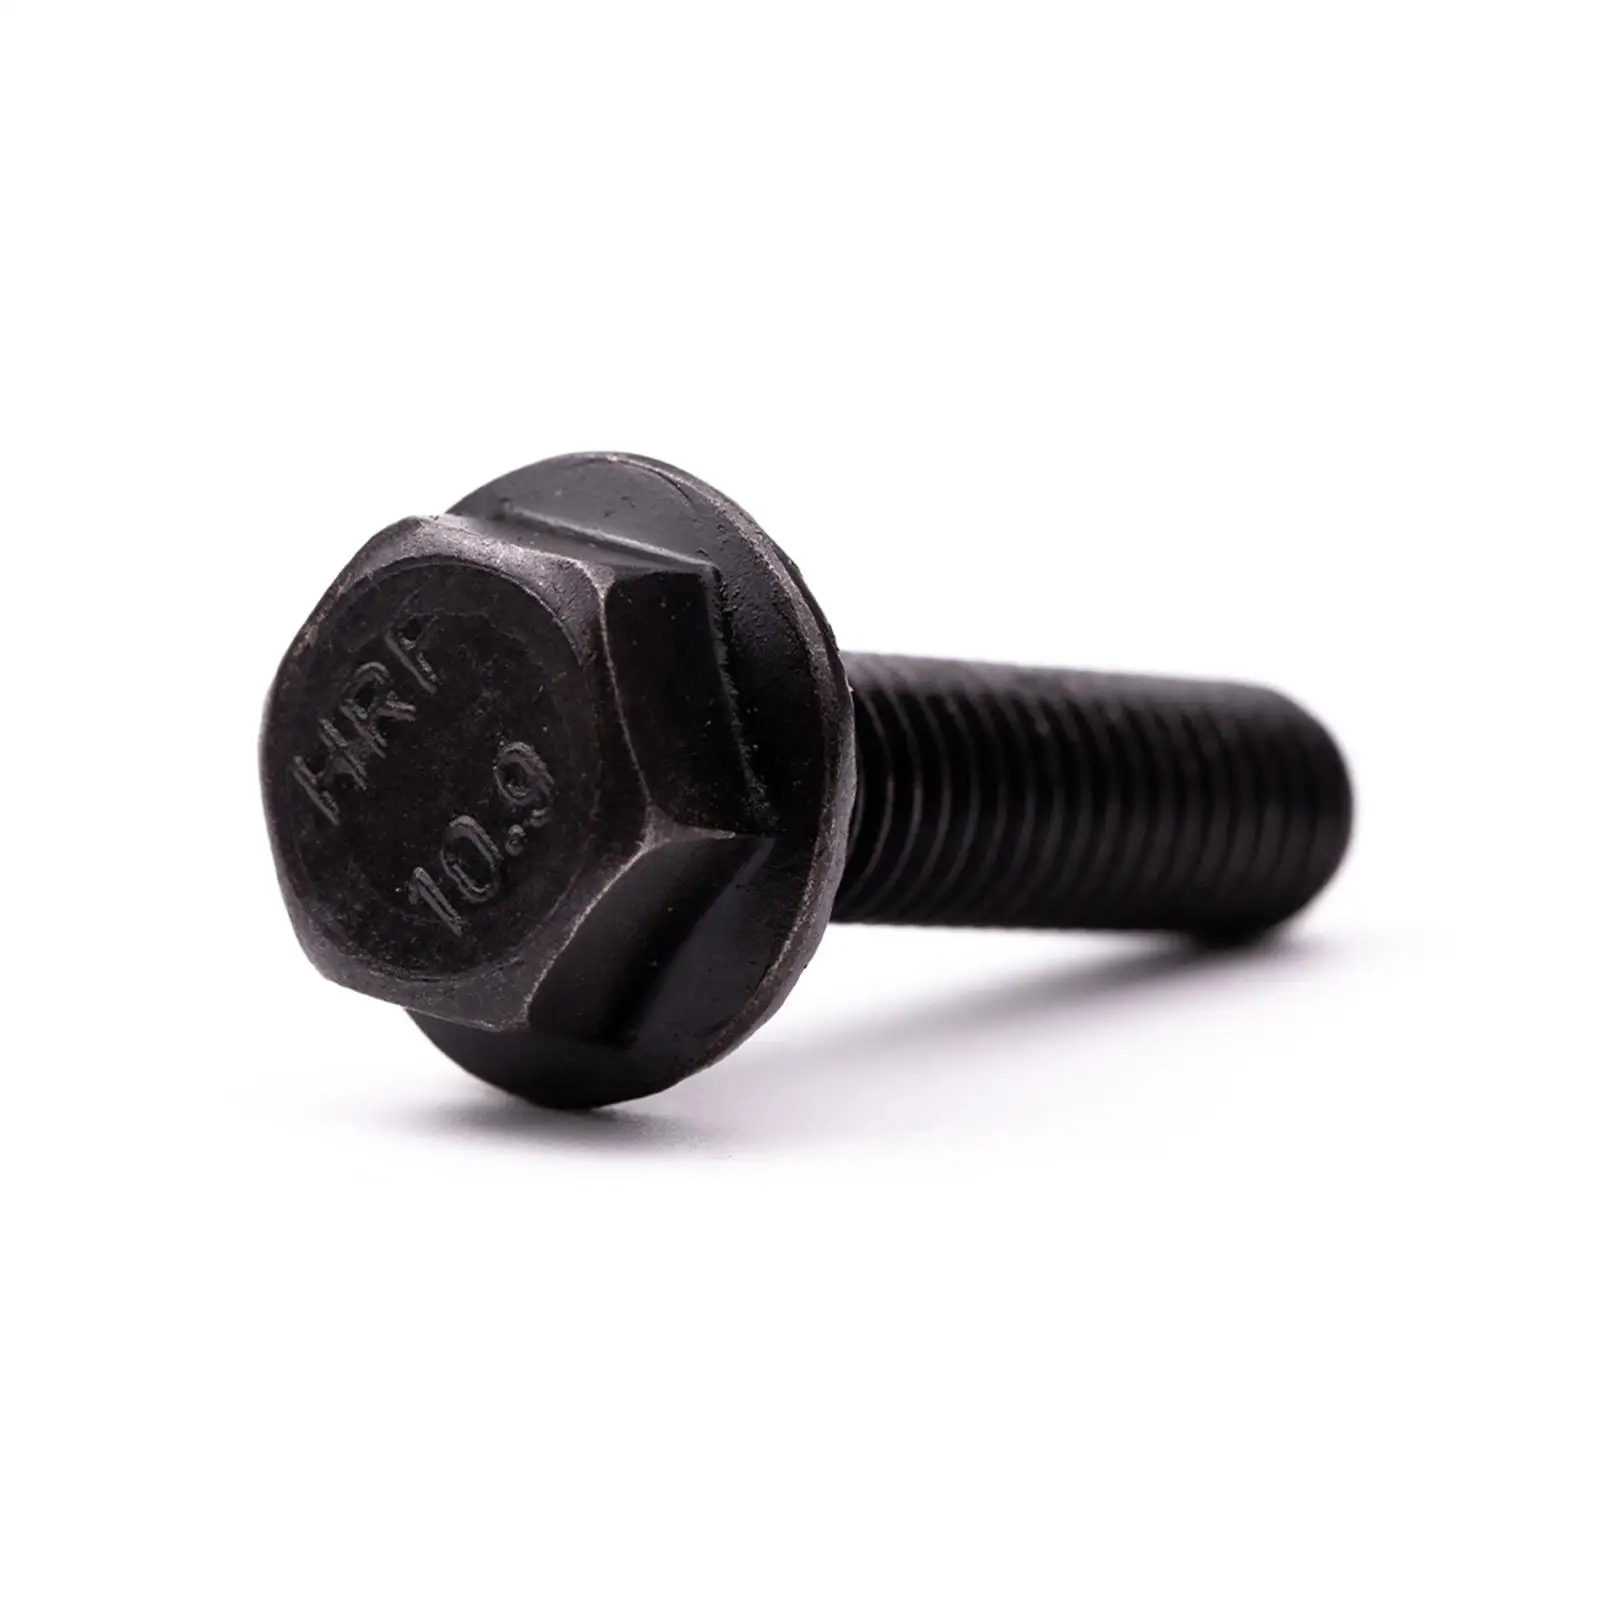 Front Seat Mounting Bolts Durable Car for Jeep Wrangler TJ 1997-2006